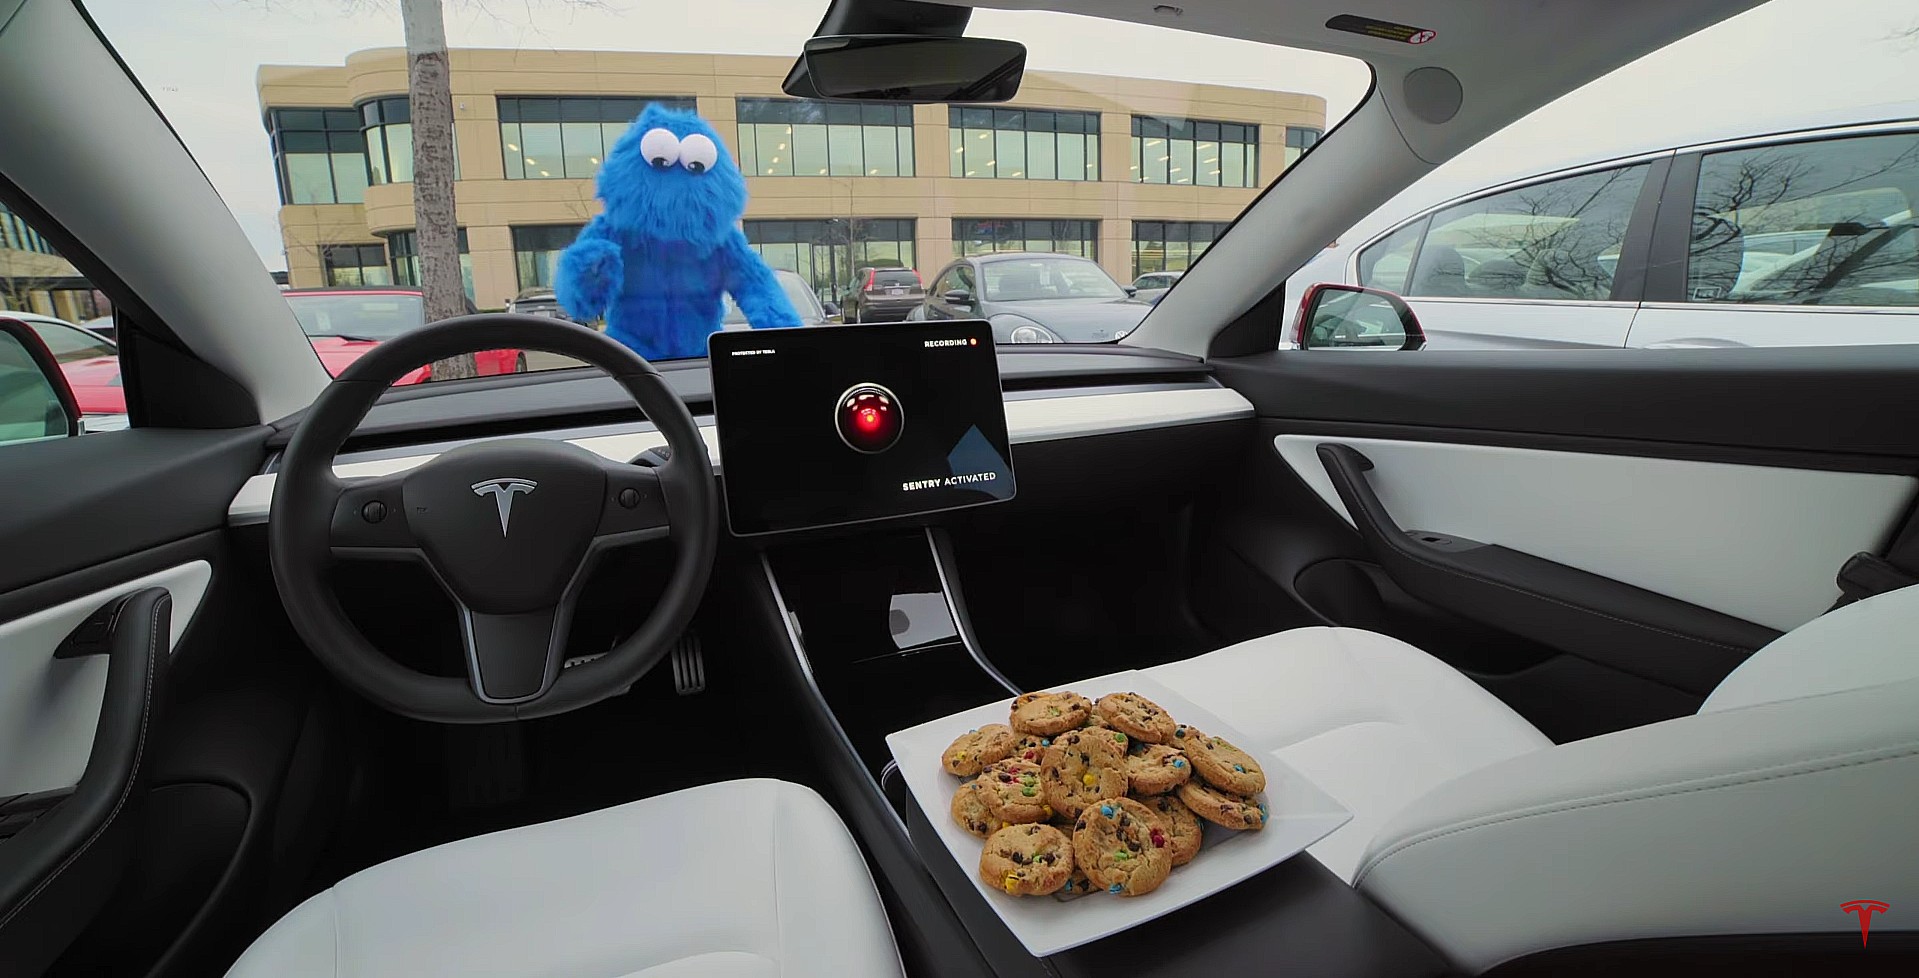 Tesla showcases Sentry Mode in hilarious Cookie Monster sketch